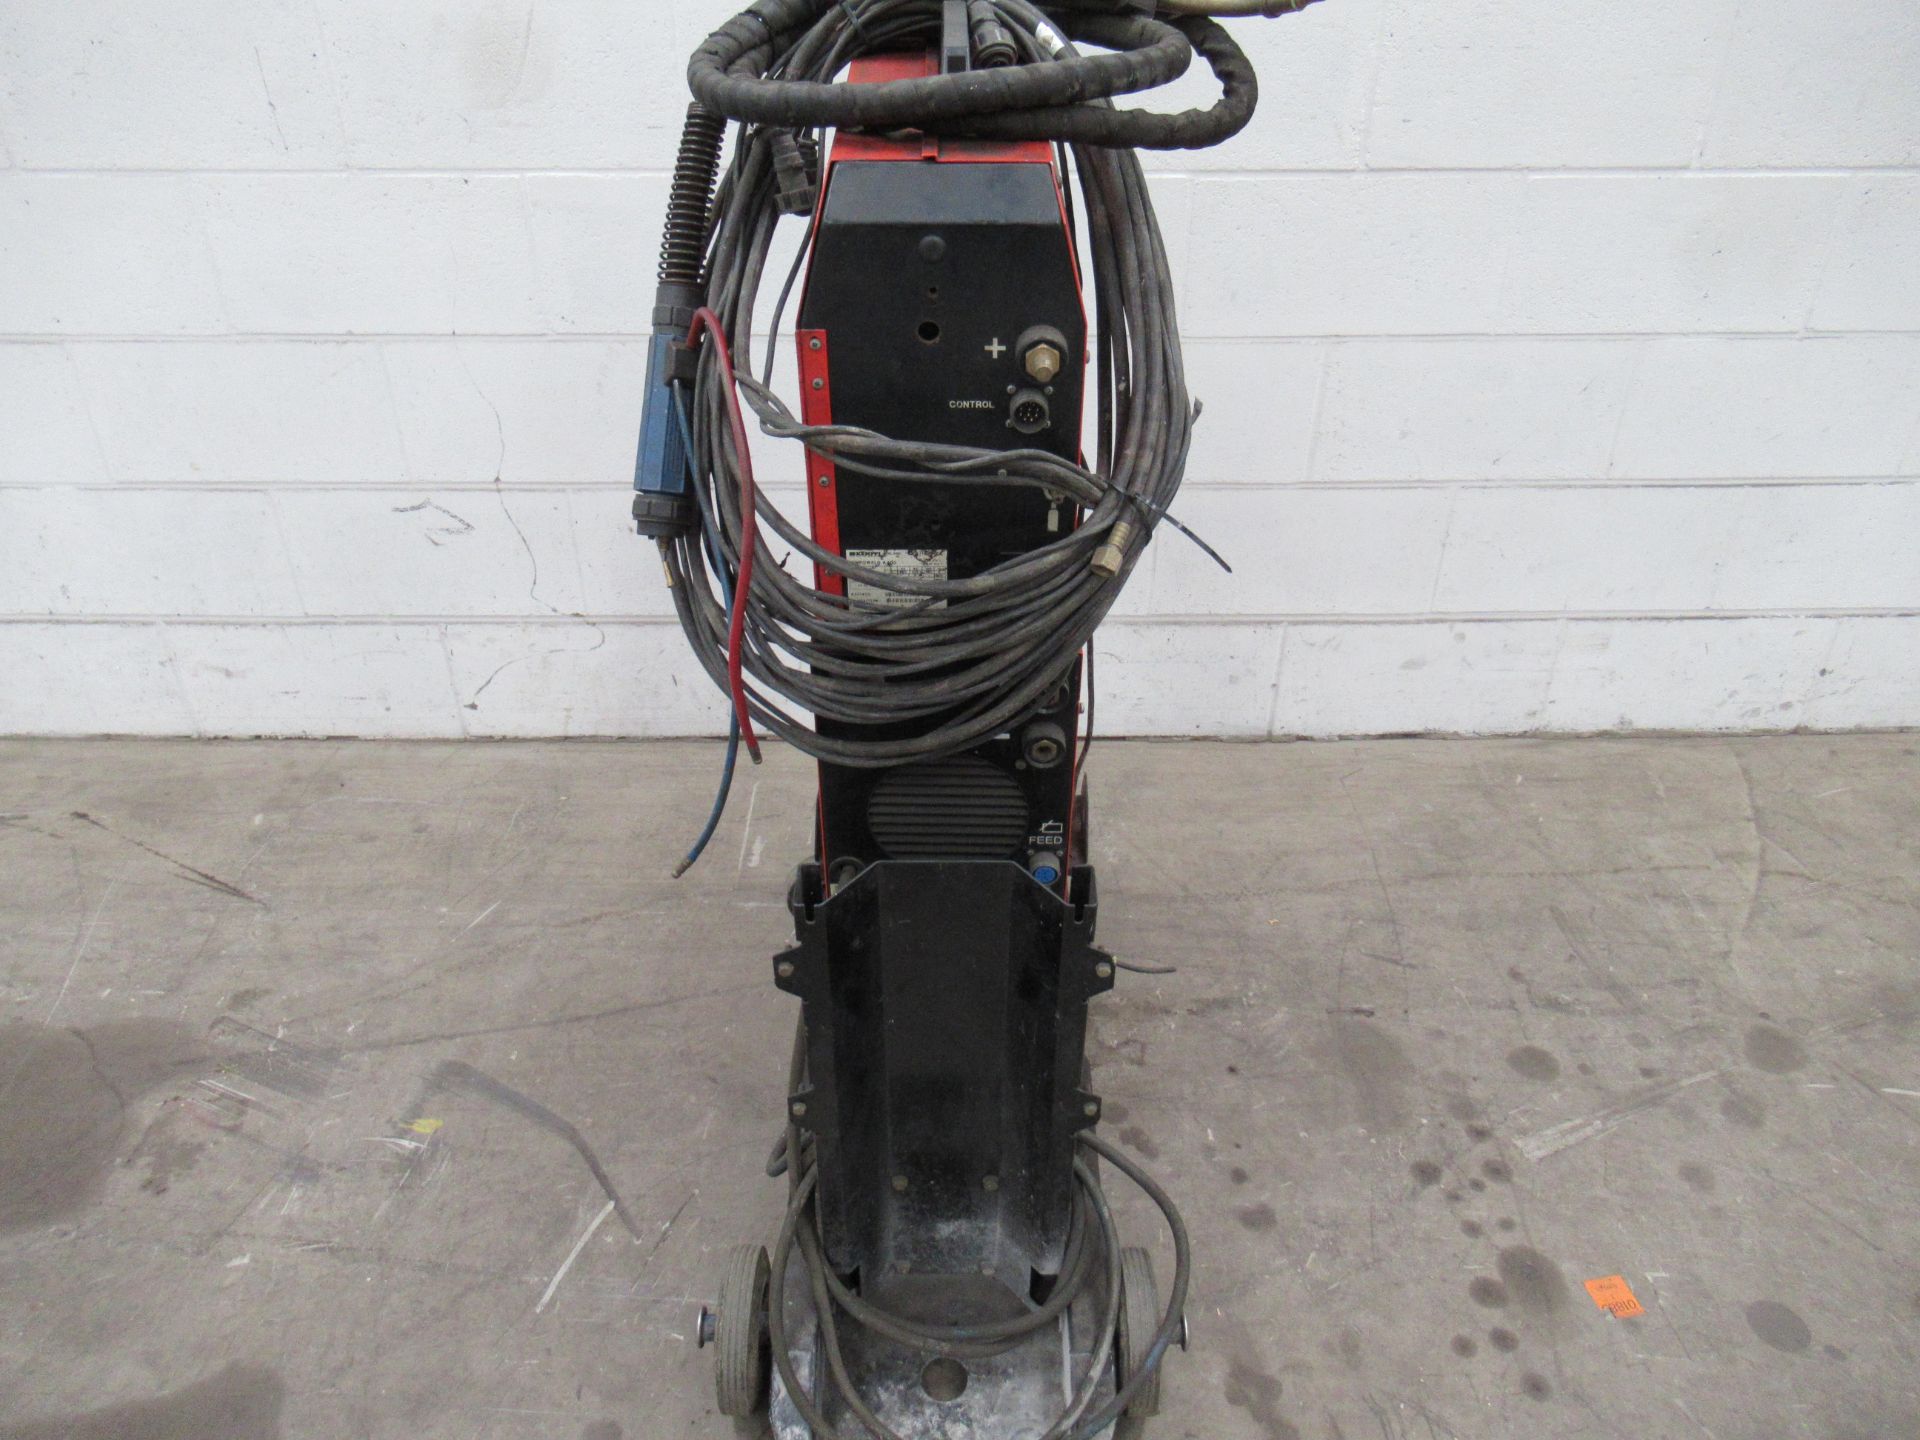 Kemppi Kempomig 4000 and Kemppi Kempoweld wire 400 MiG welder including wire feed, torch, and leads - Image 4 of 10